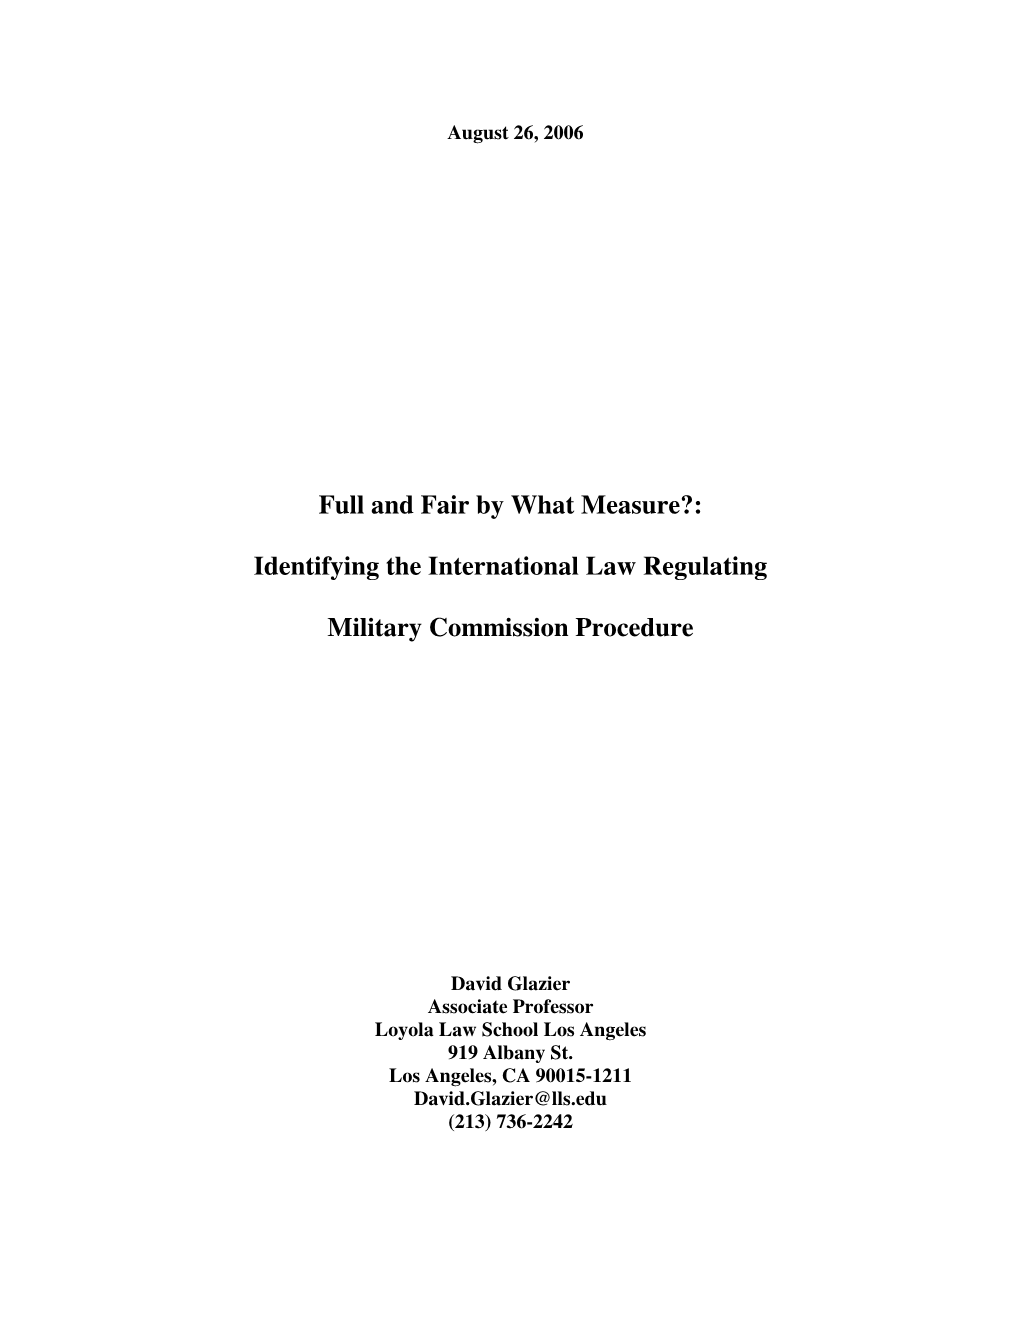 Identifying the International Law Regulating Military Commission